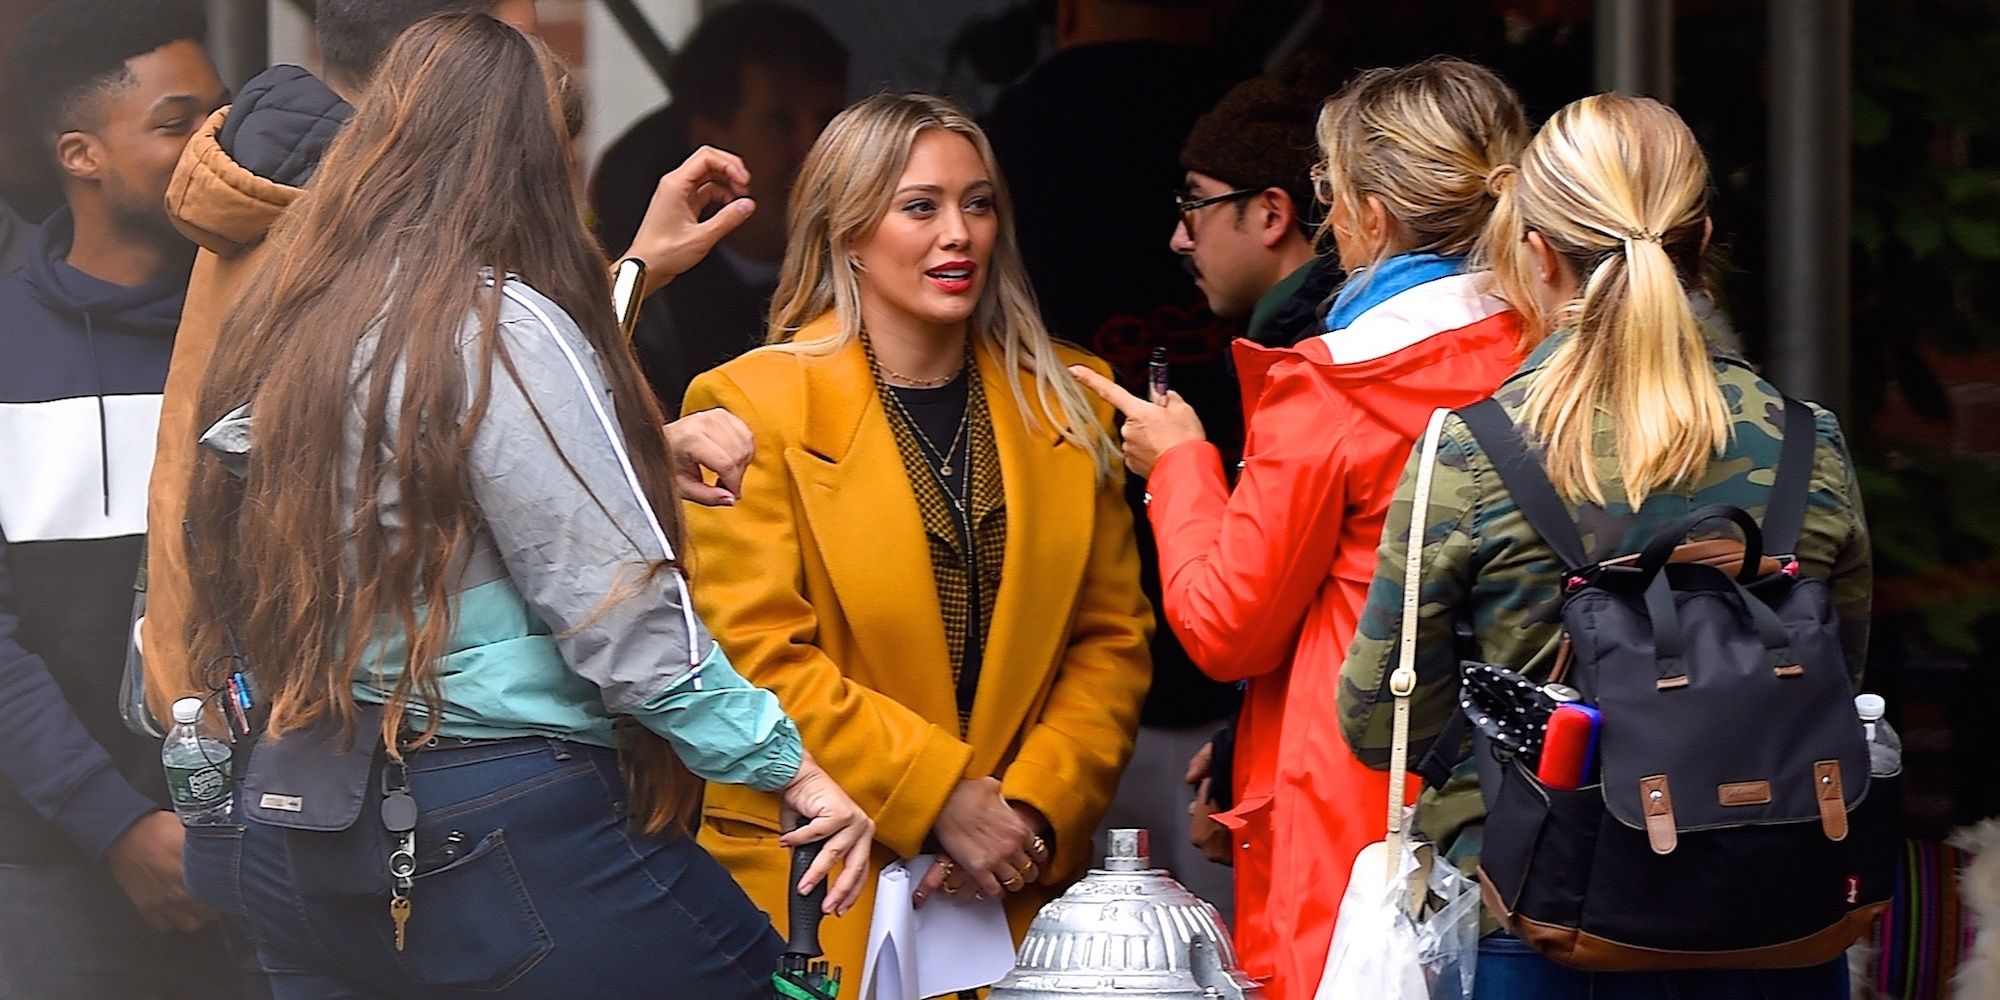 Lizzie McGuire reboot-first day of filming